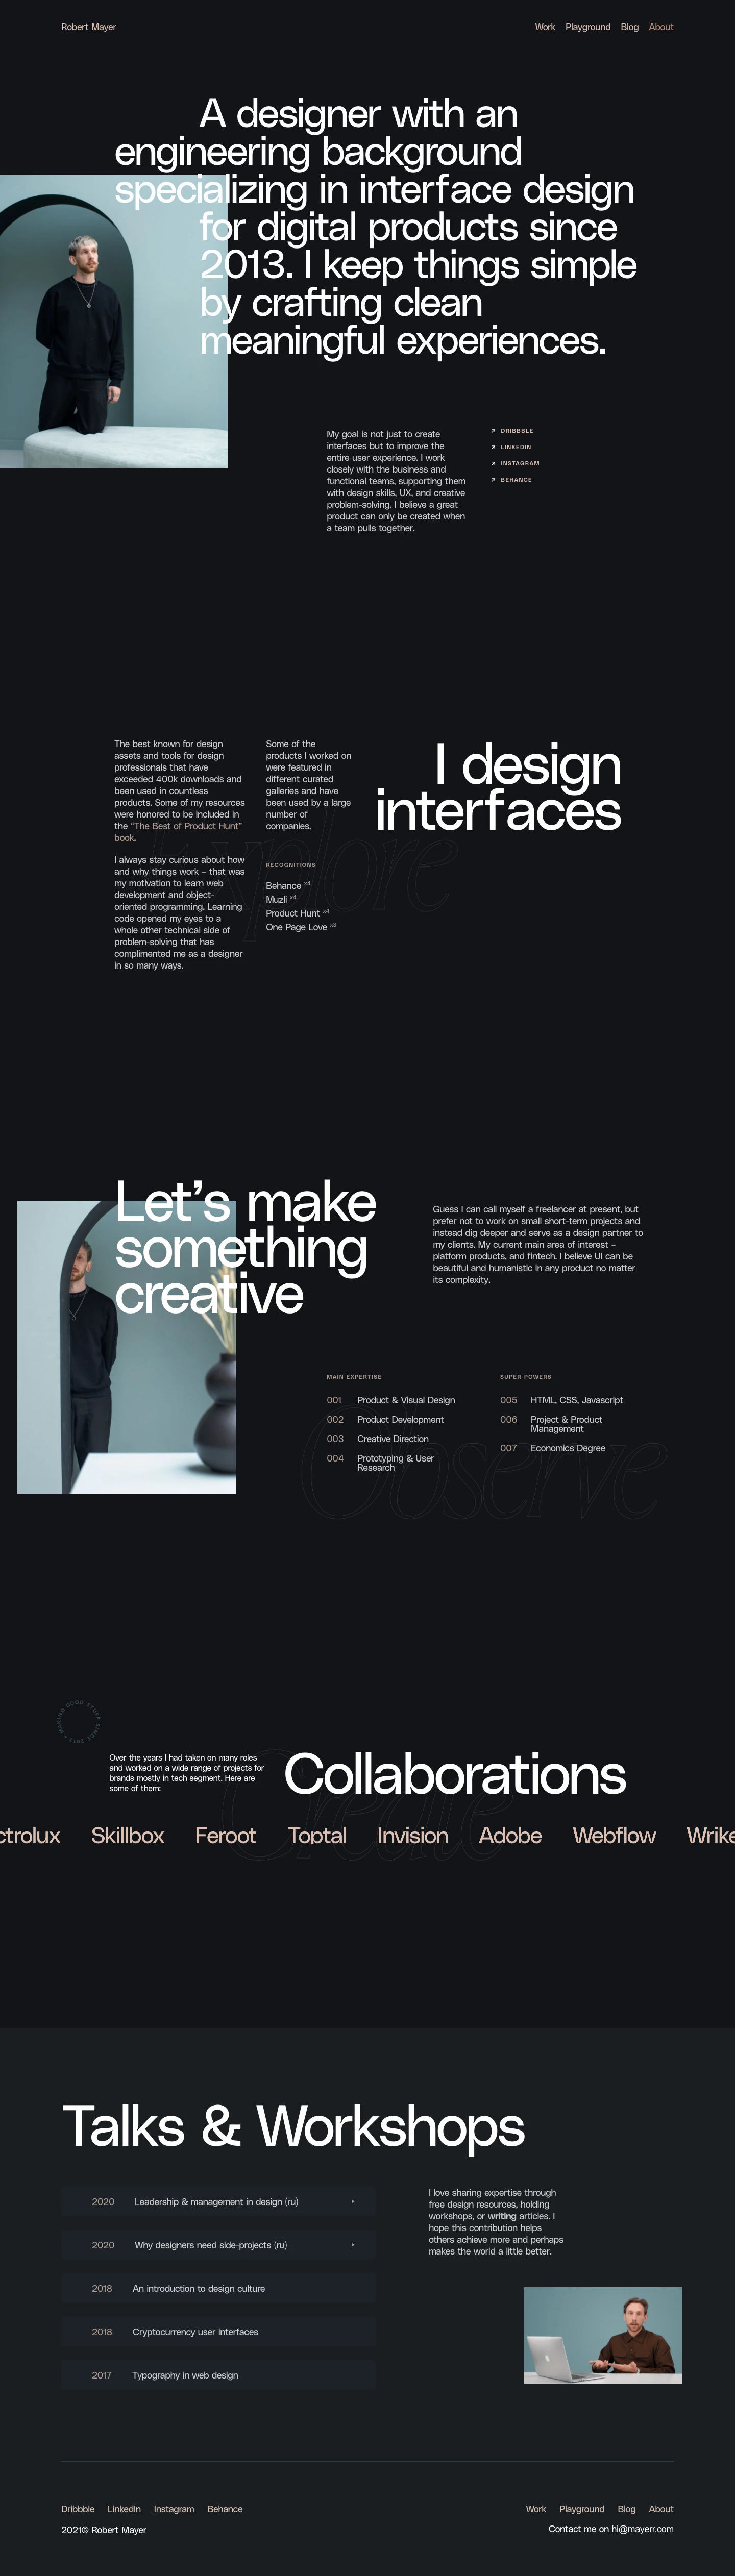 Robert Mayer Landing Page Example: A designer with an engineering background, specializing in interface design for digital products since 2013.